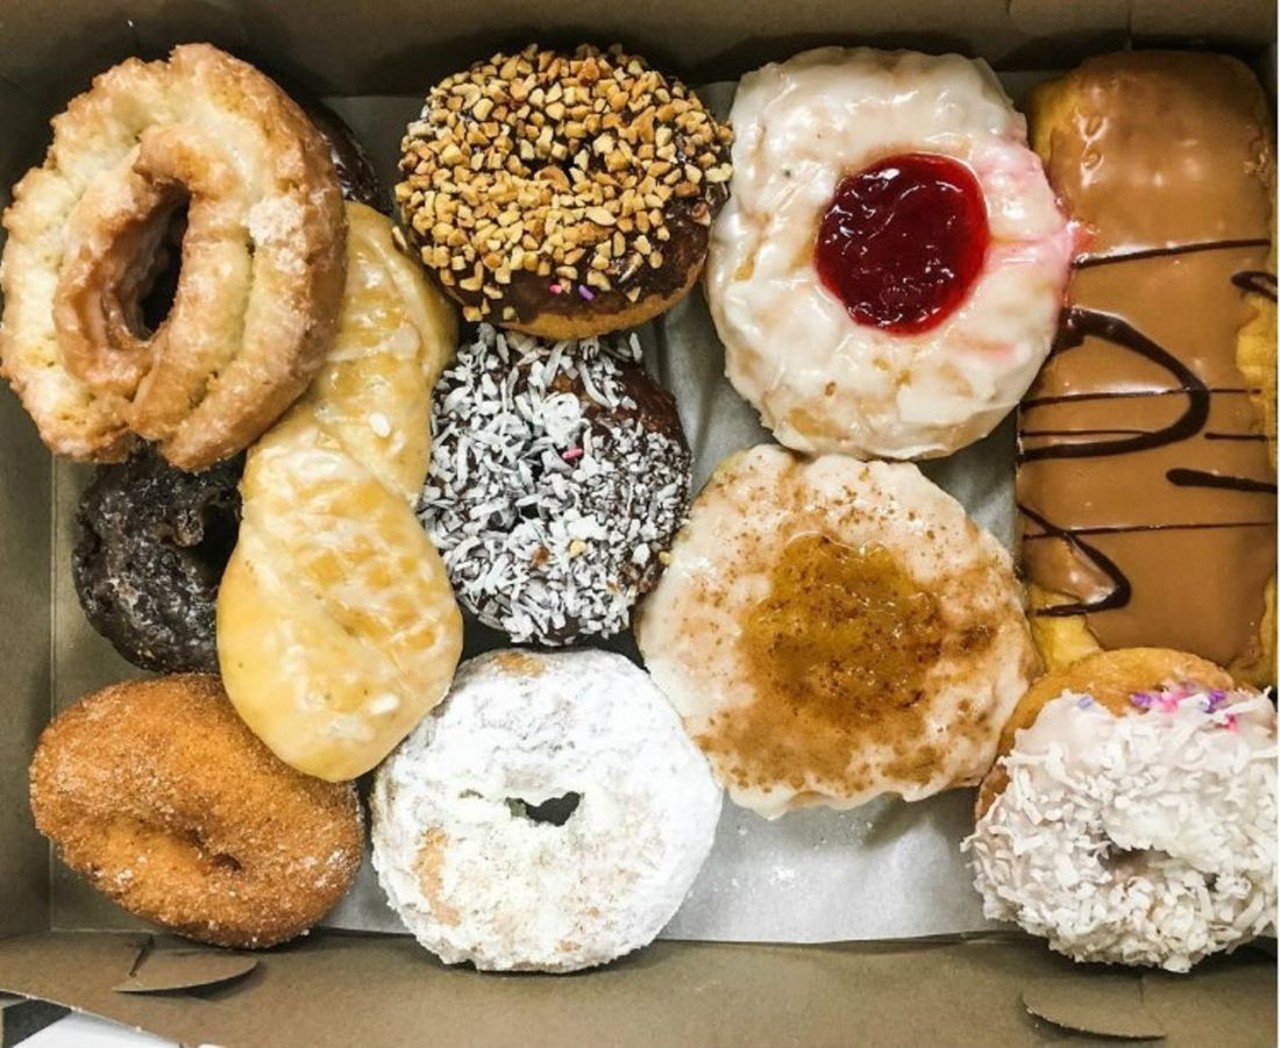 Old Town Donut Shop
(508 N. New Florissant Road, 314-831-0907)
Photo credit: RFT file photo